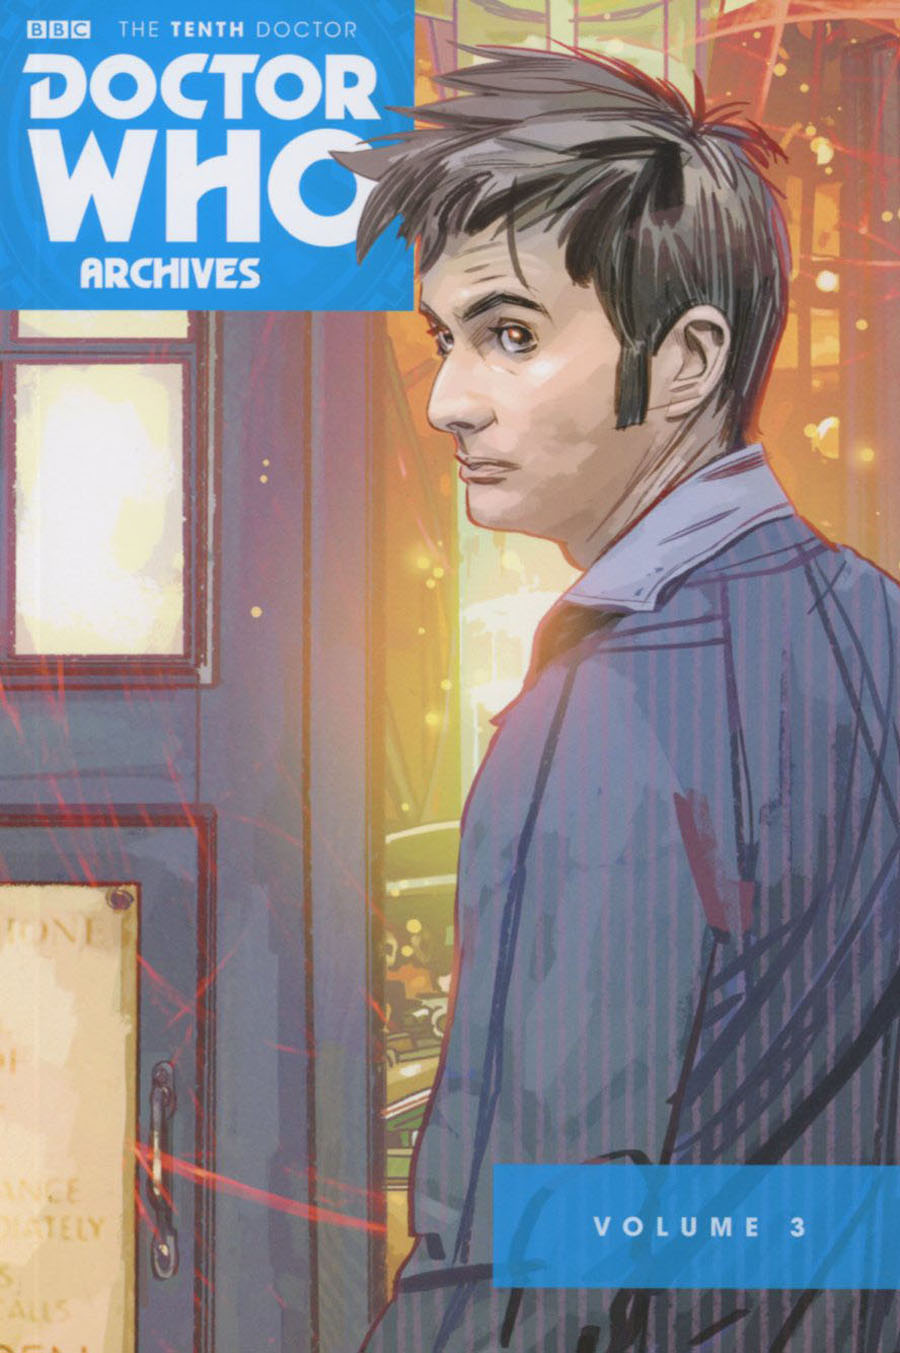 Doctor Who 10th Doctor Archives Vol 3 TP